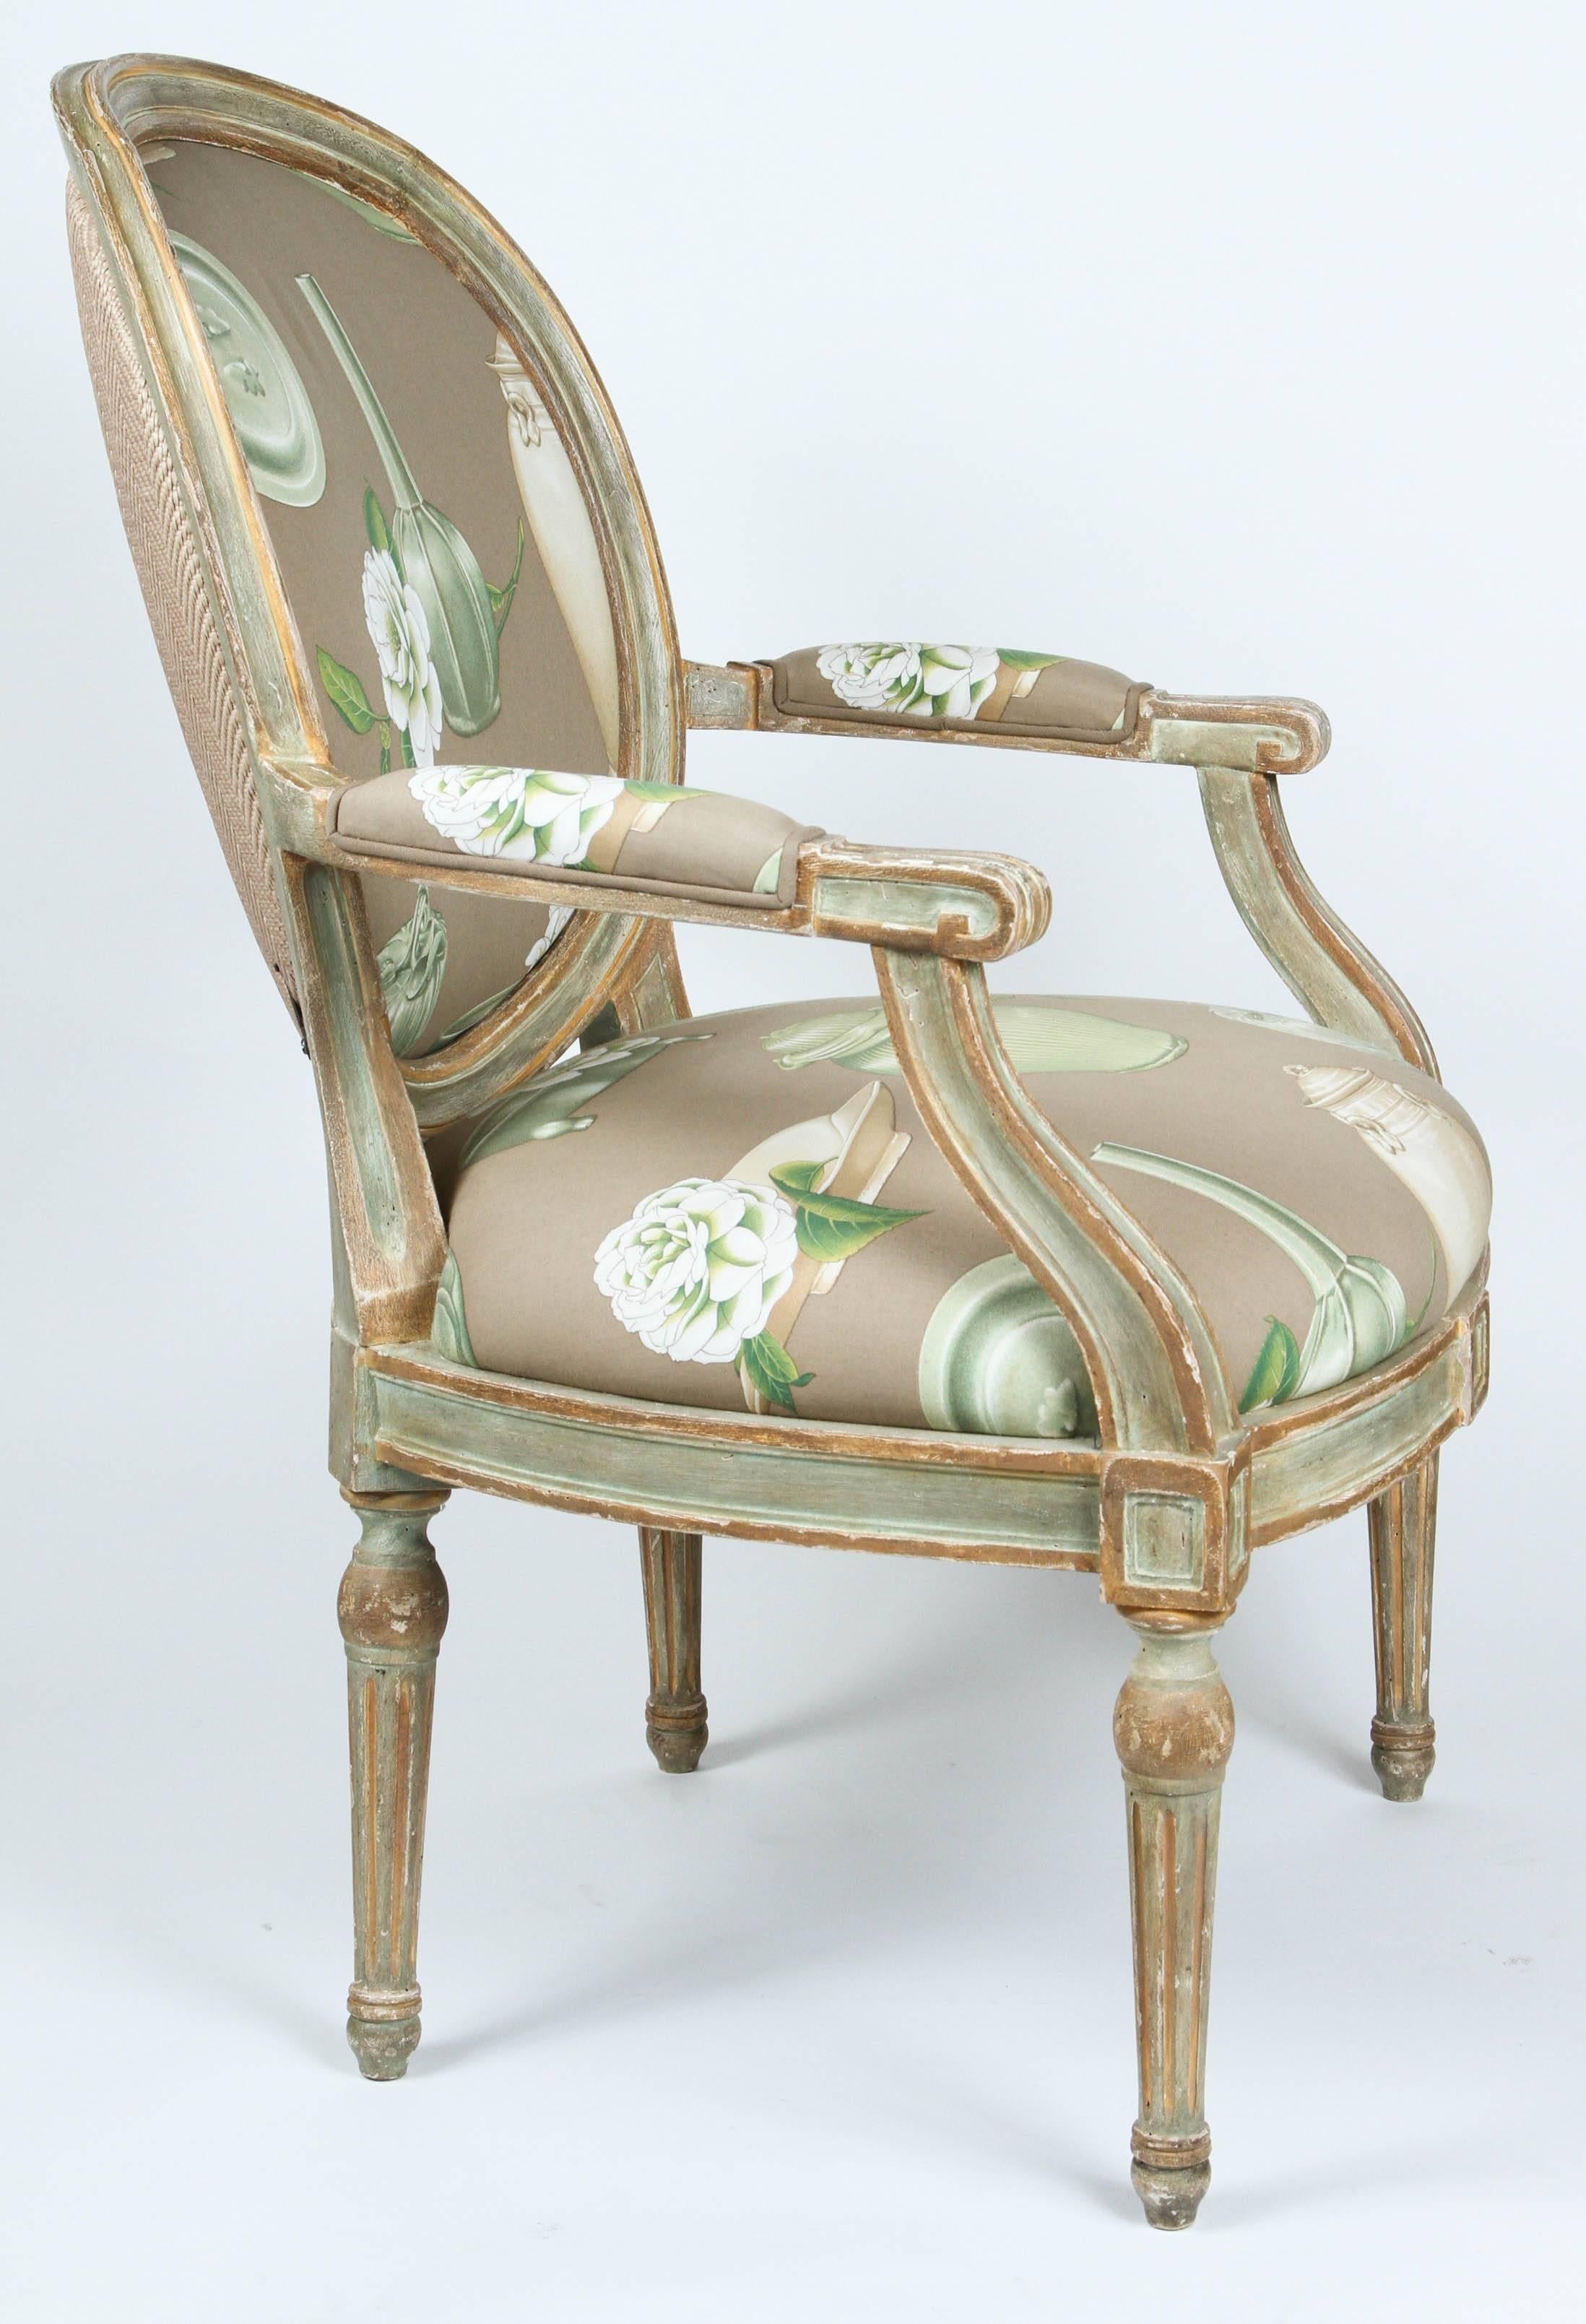 Pair of Louis XVI style oval-back armchairs upholstered in taupe, green cotton fabric with raffia fabric on backs. Wood painted green and cream with distressed finish.